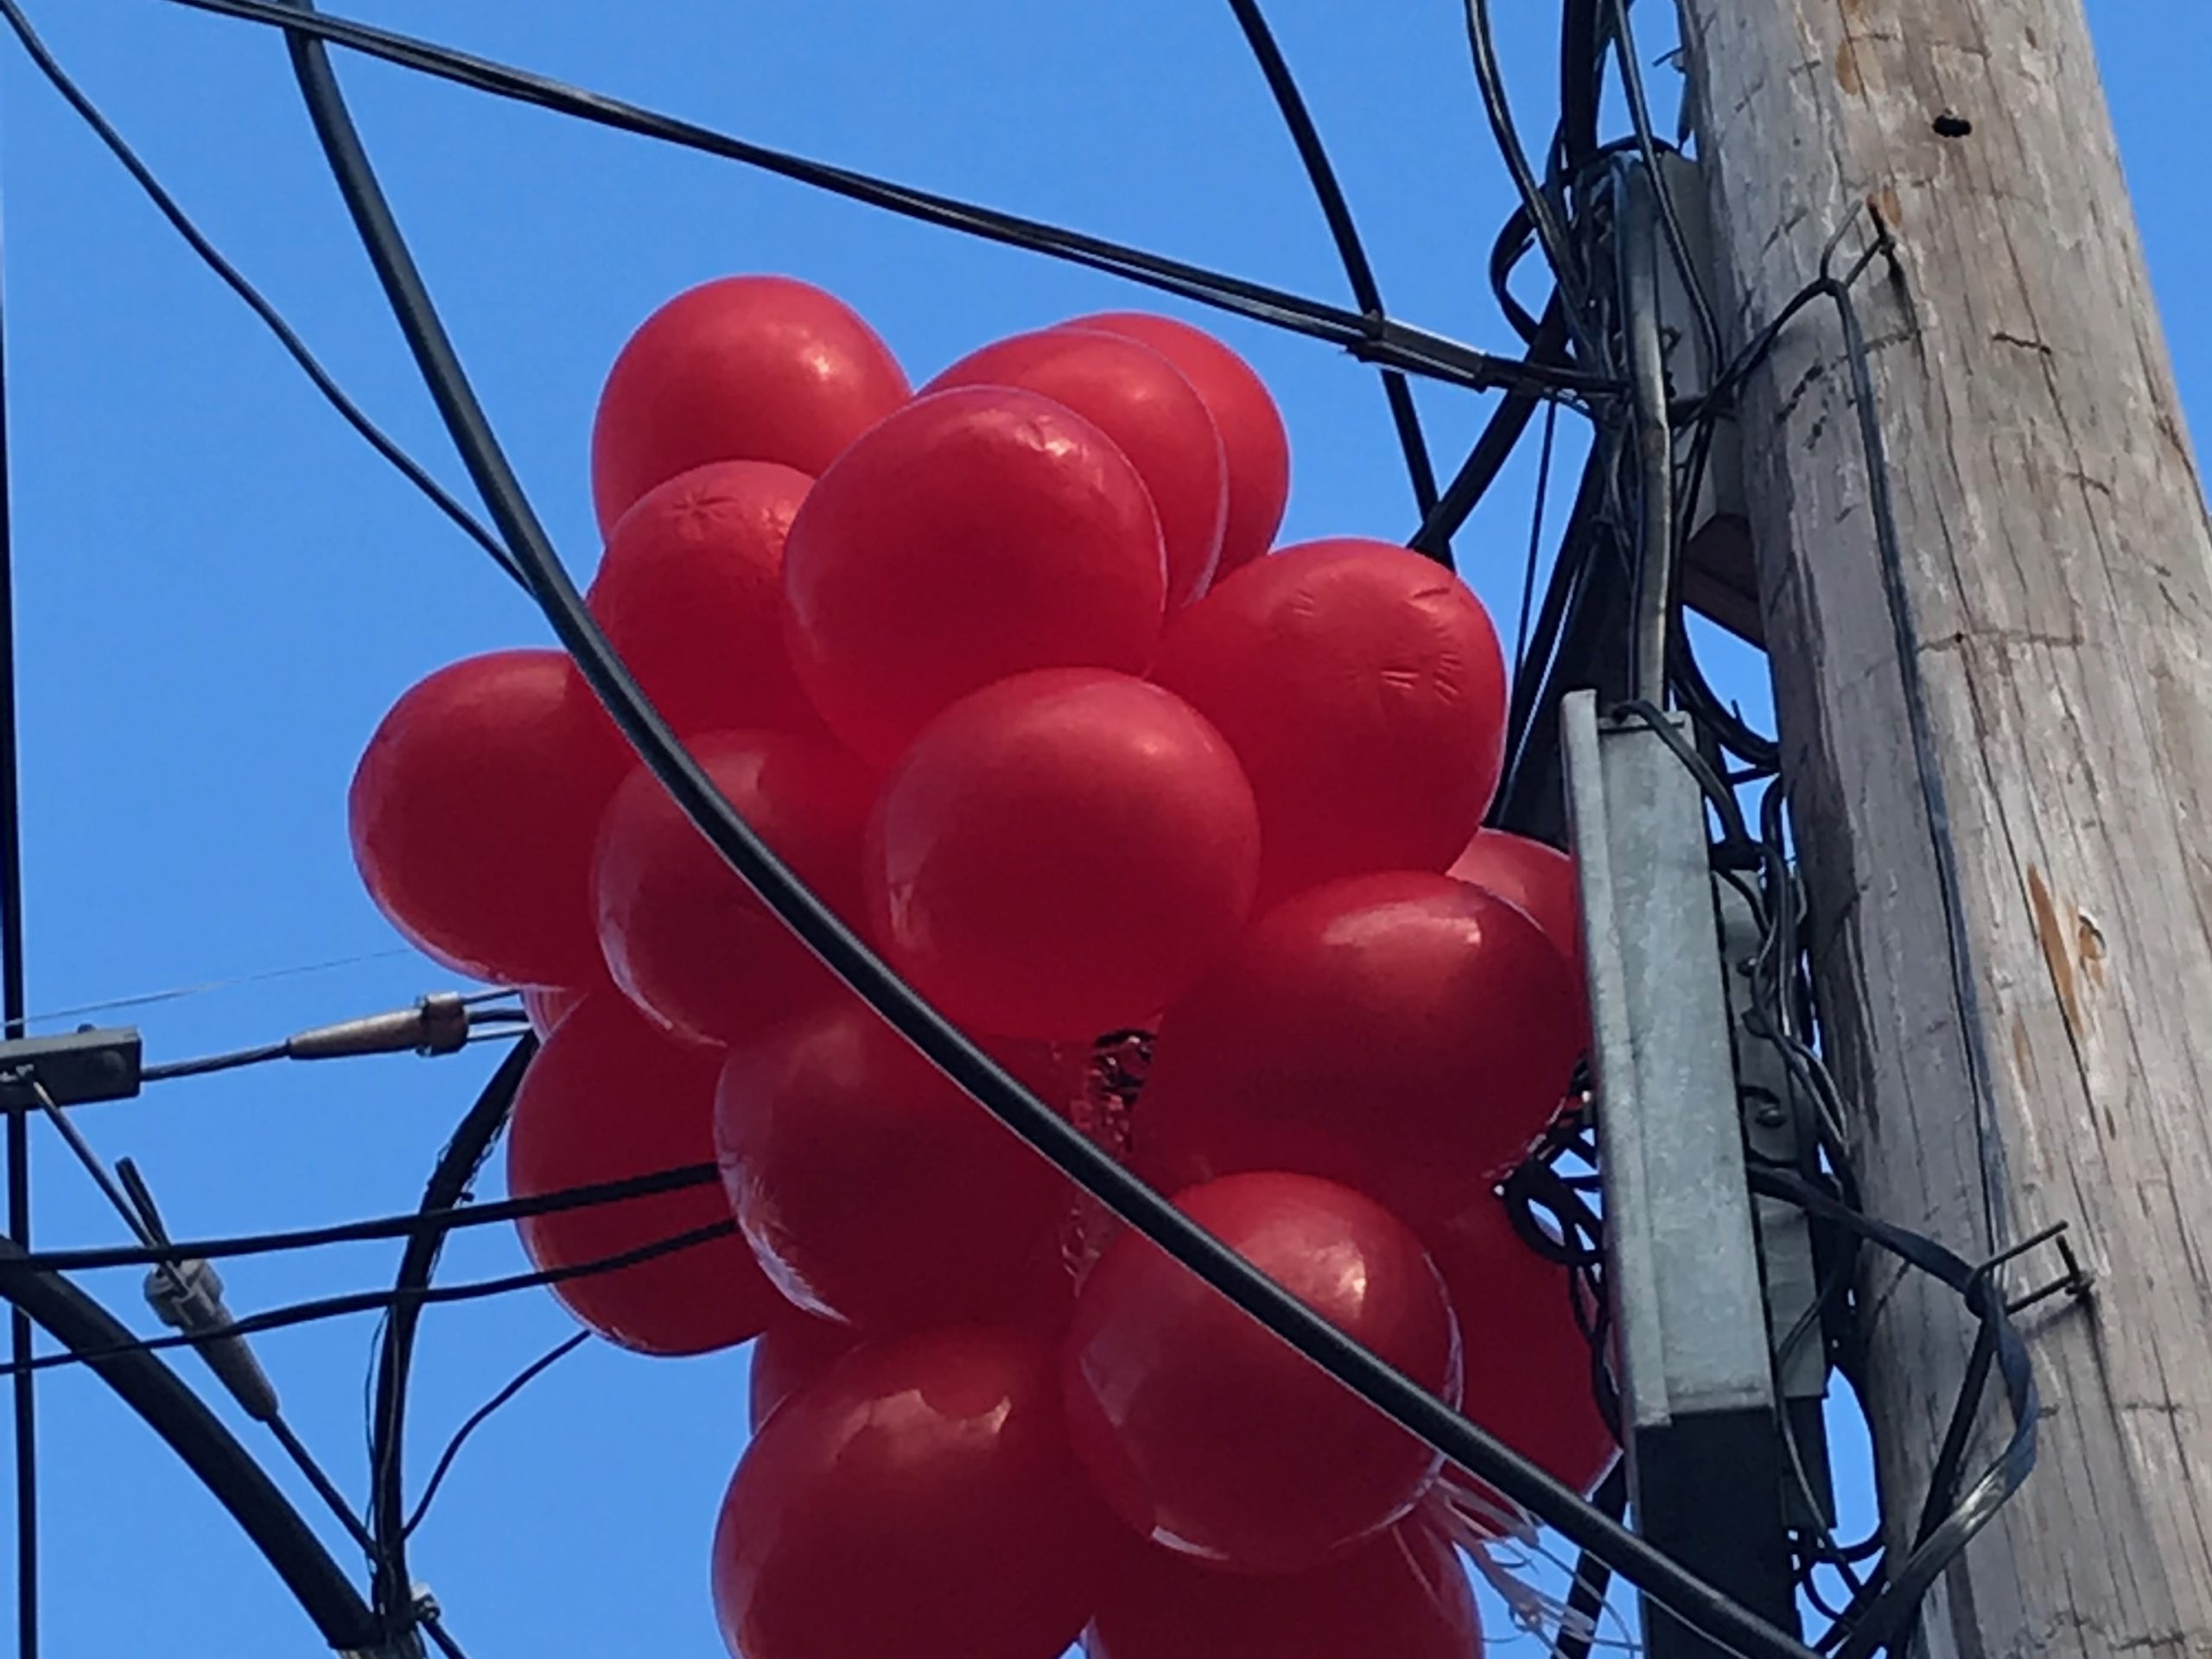 Balloon pollution can also cause power outages.